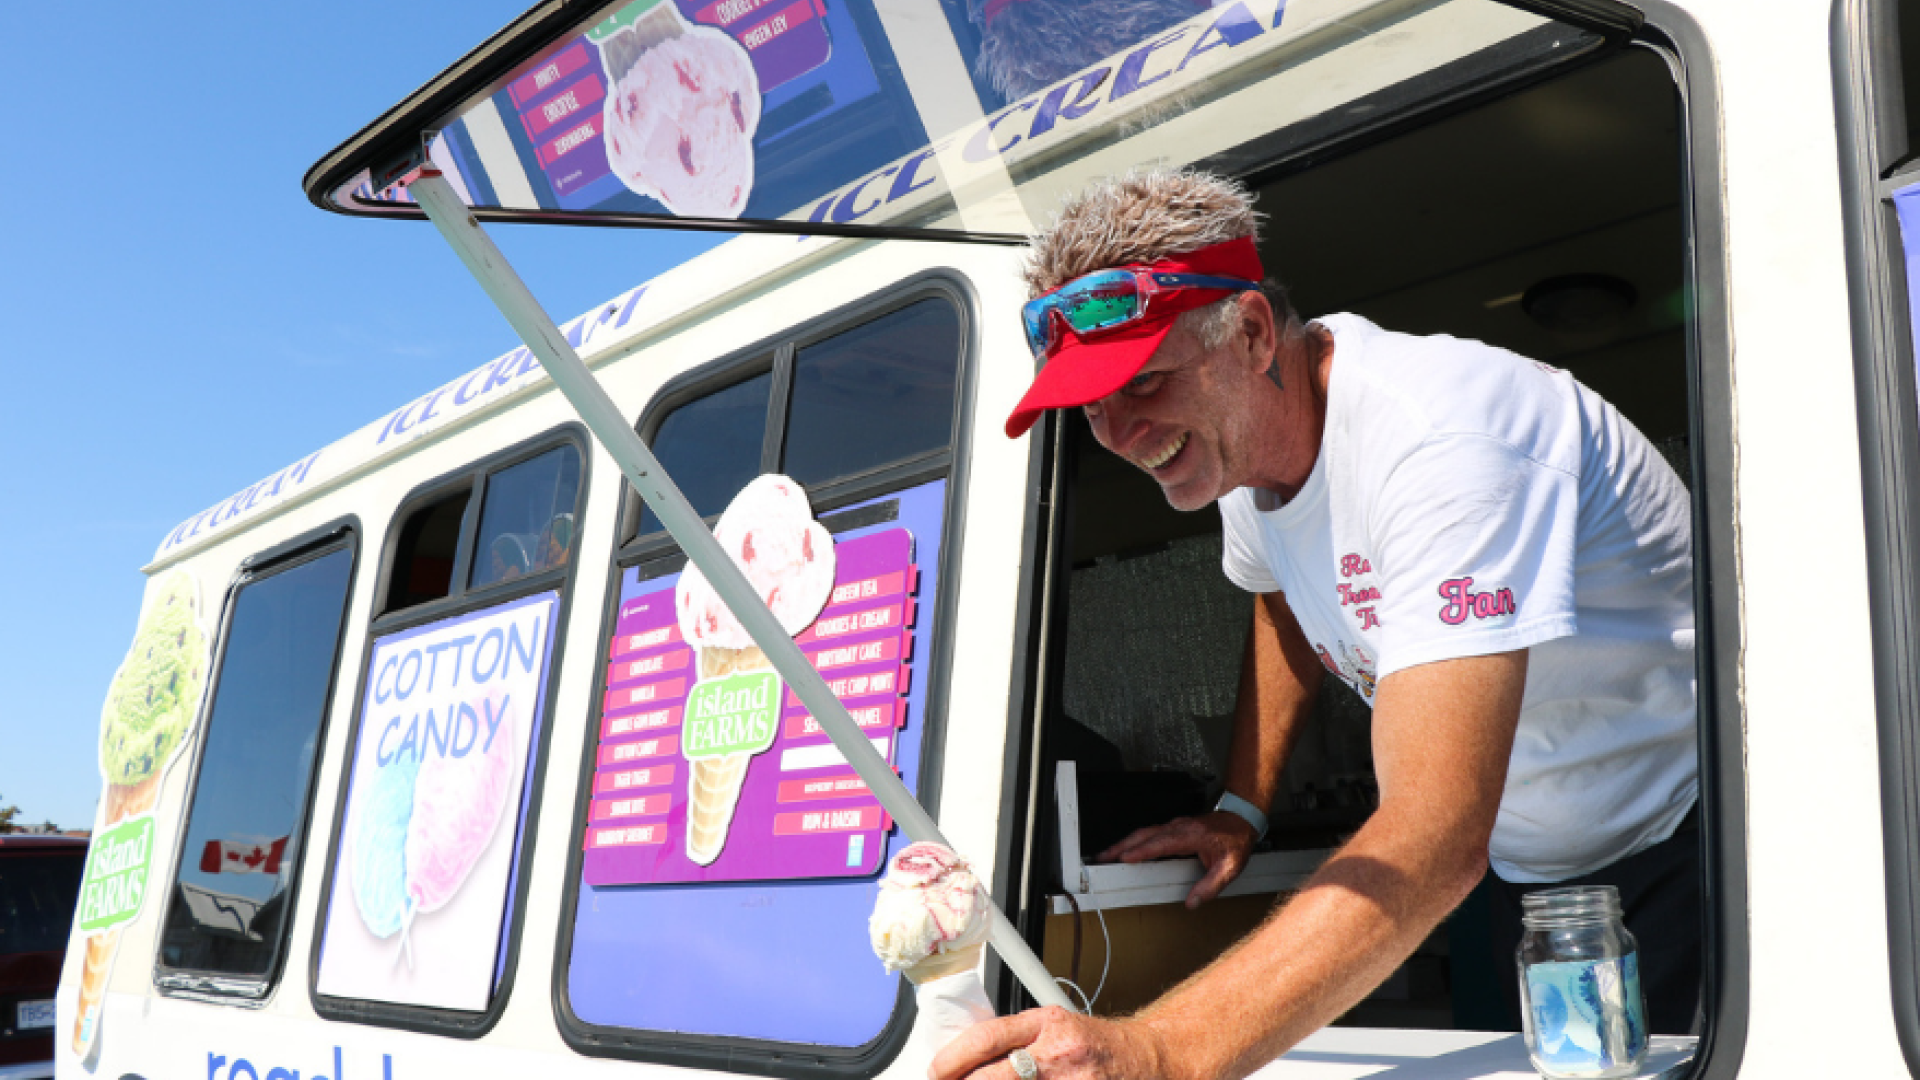 Image of an ice cream food truck with vendor leaning out of window handing an ice cream cone to someone not in view.